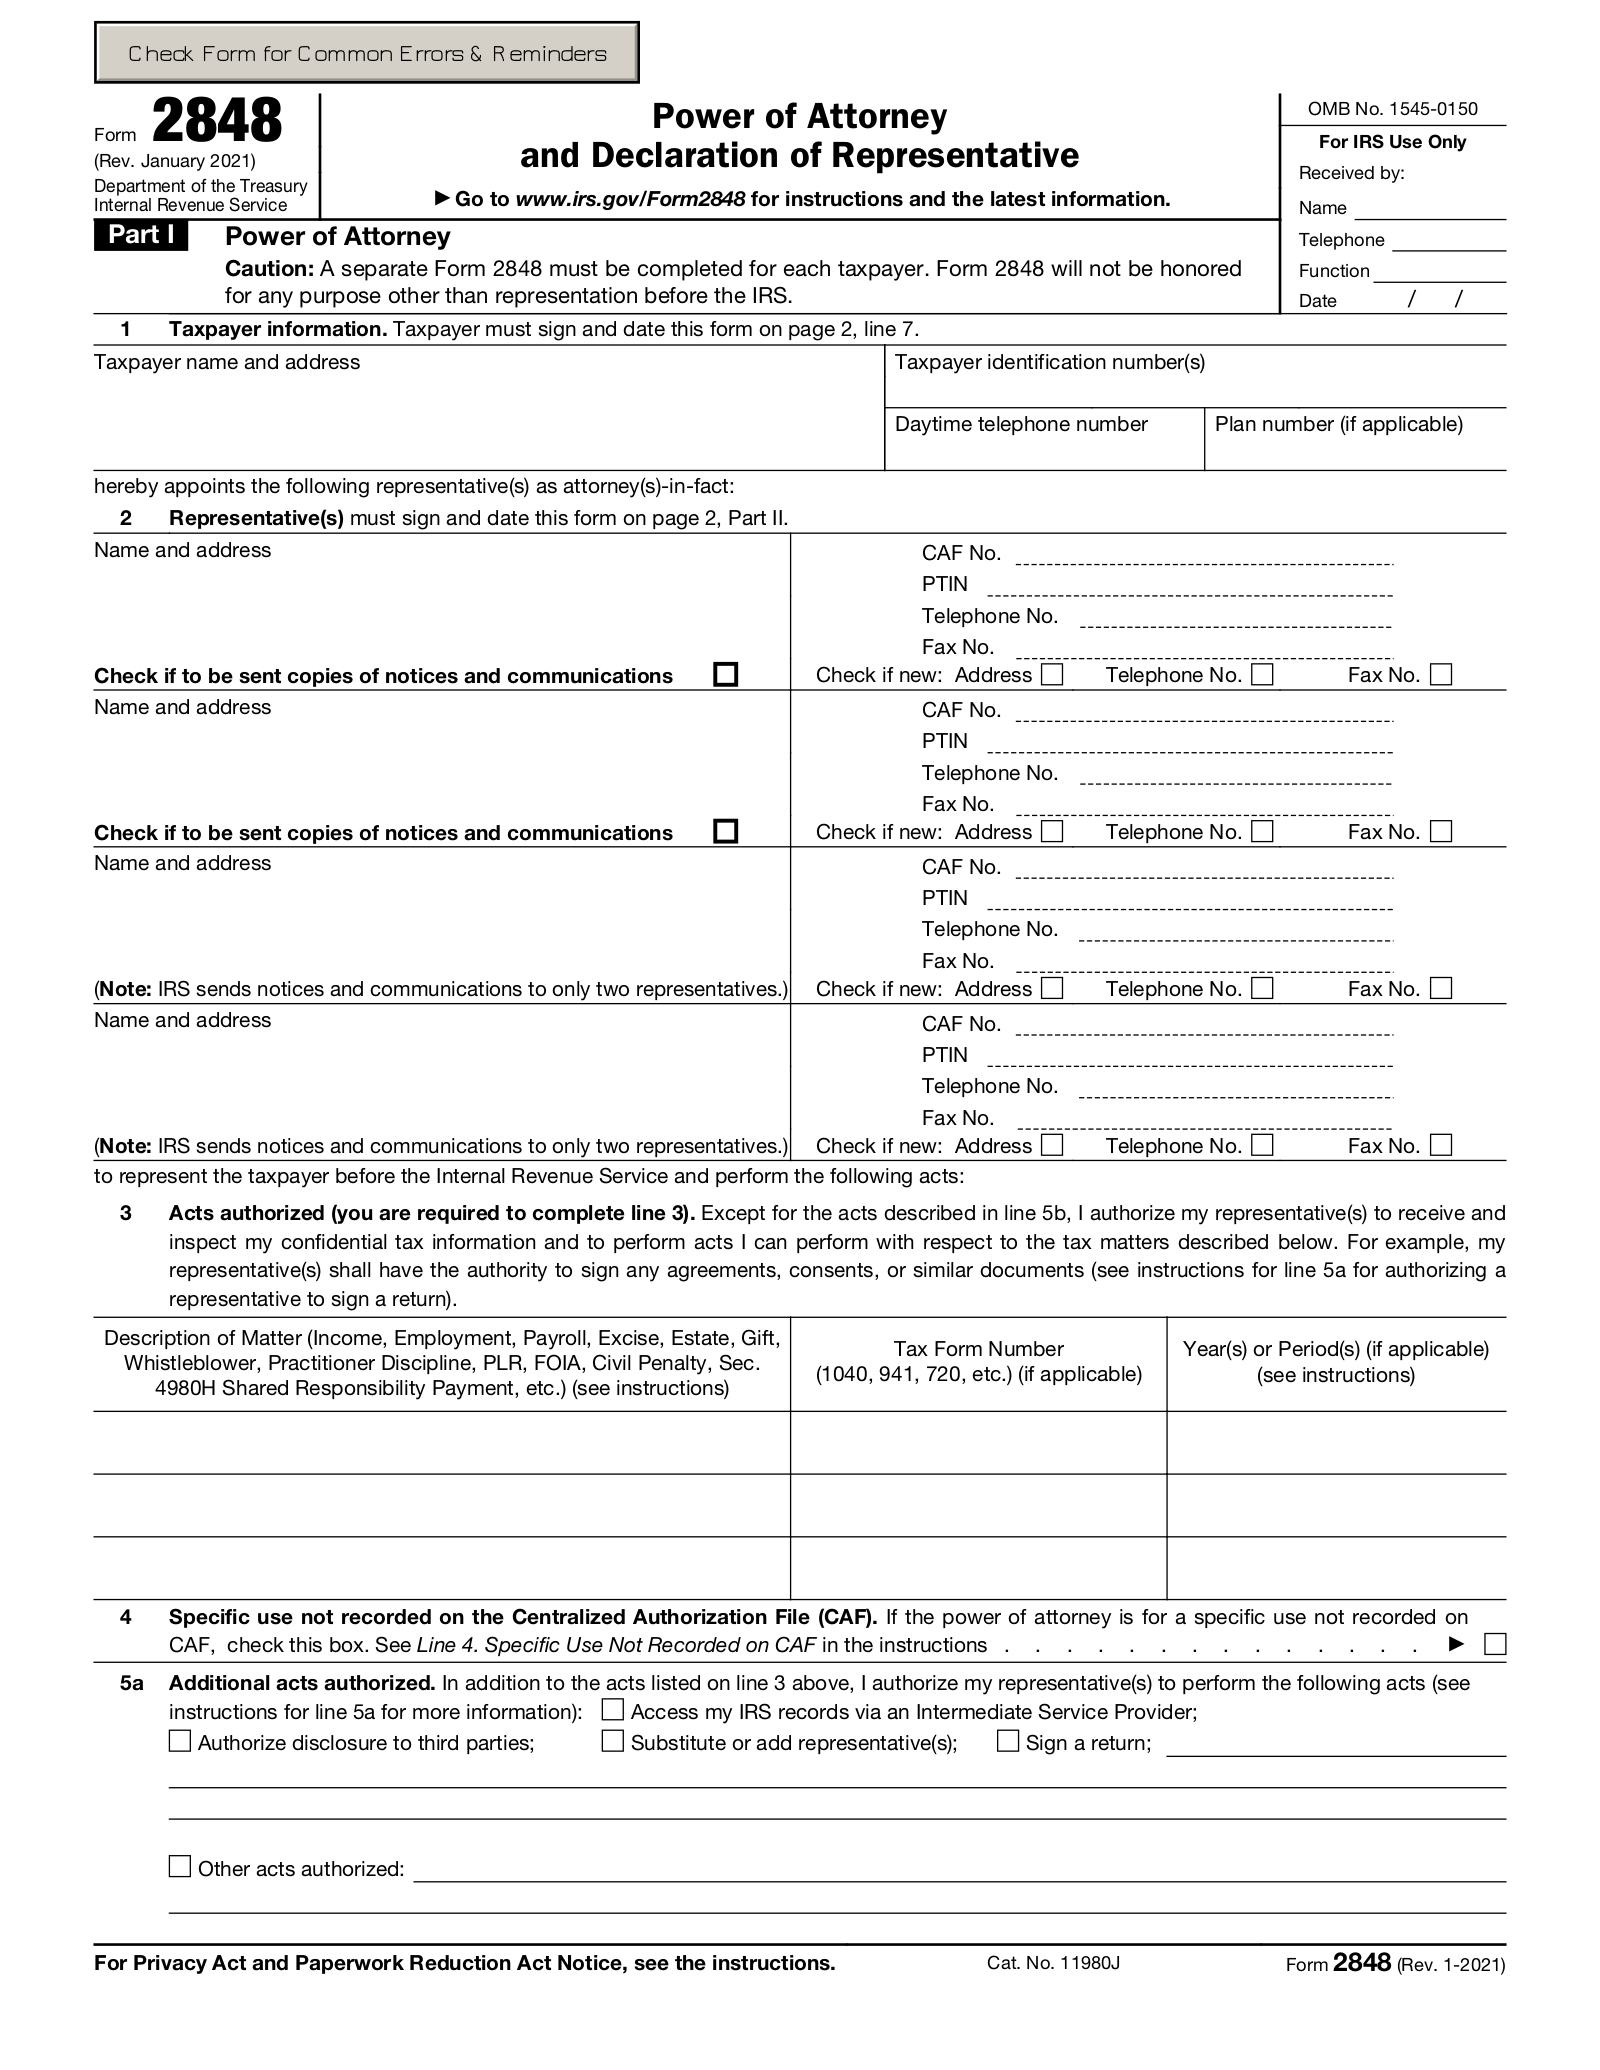 where-to-sign-on-power-of-attorney-form-2848